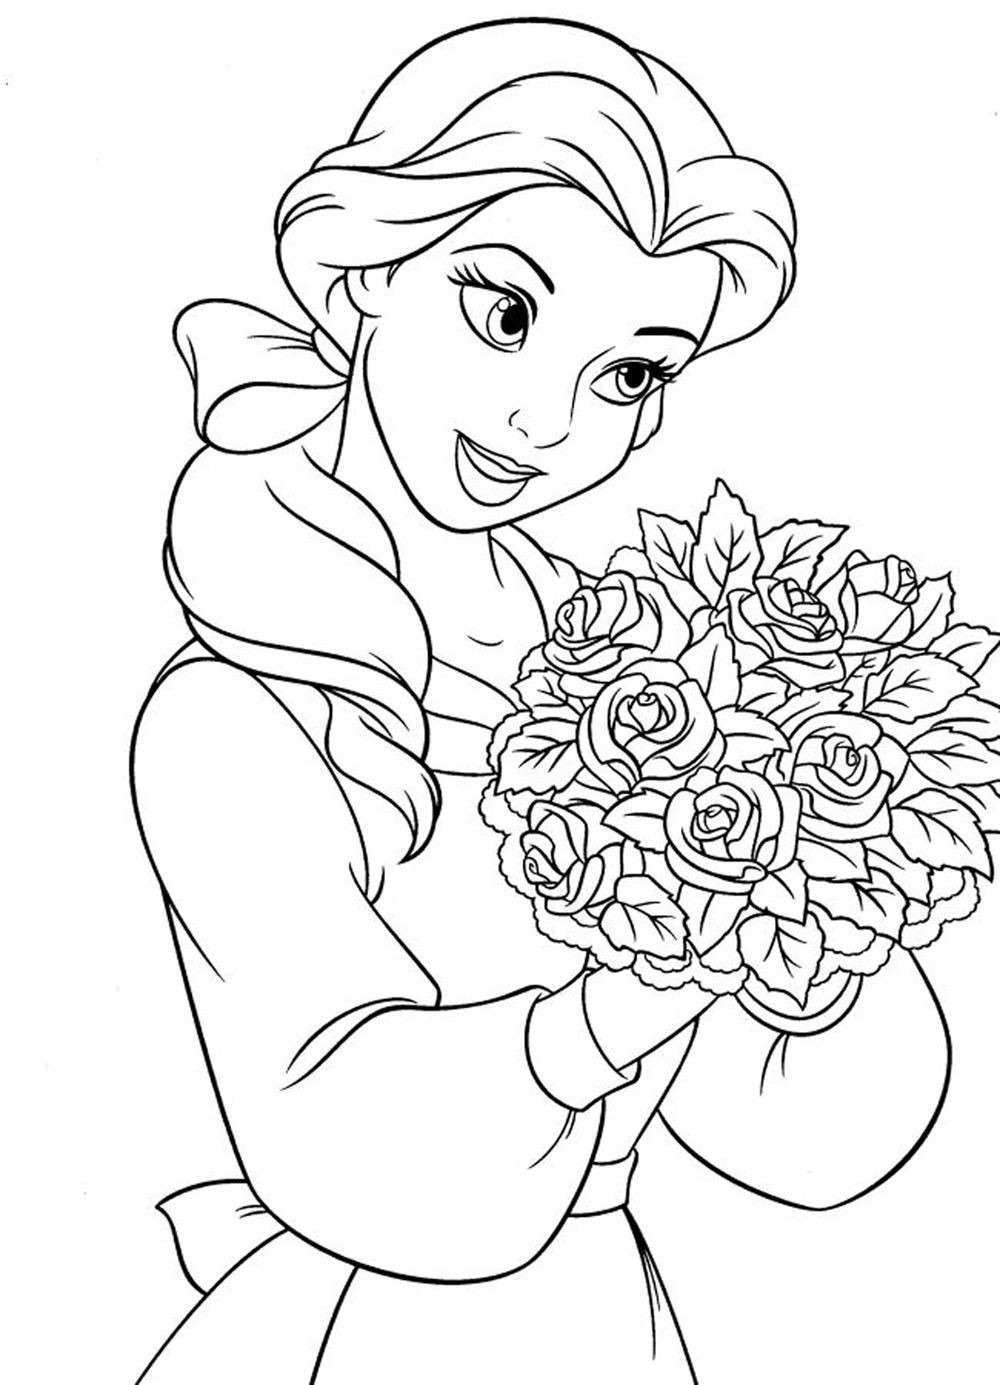 Princess Coloring Pages For Girls
 princess coloring pages for girls Free